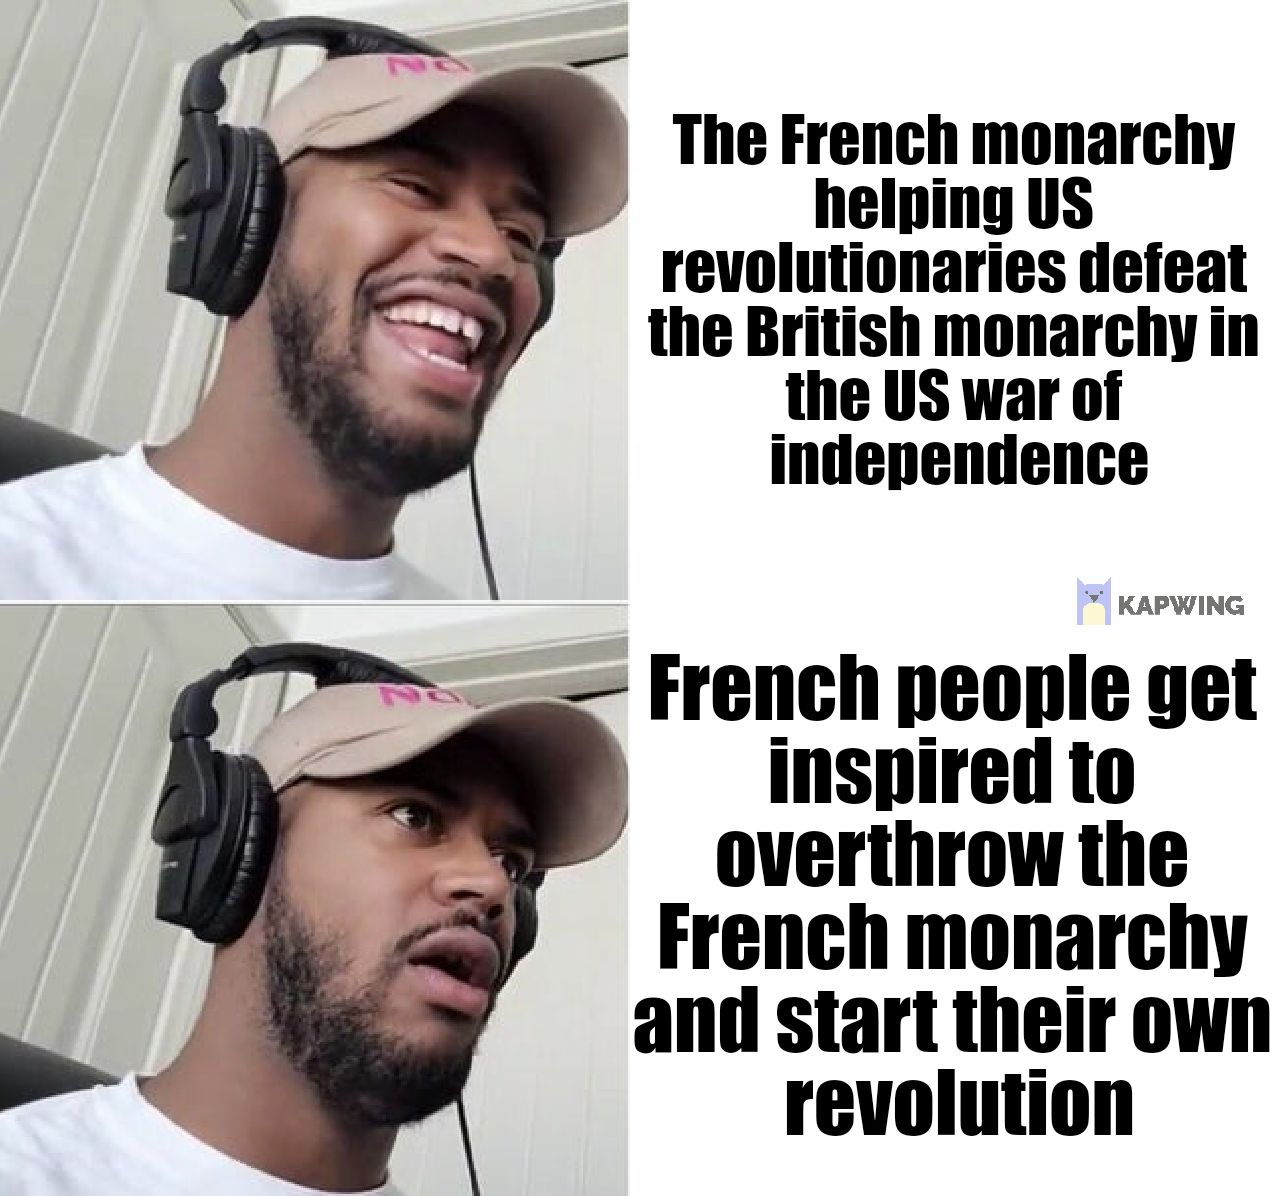 The irony of France helping the US